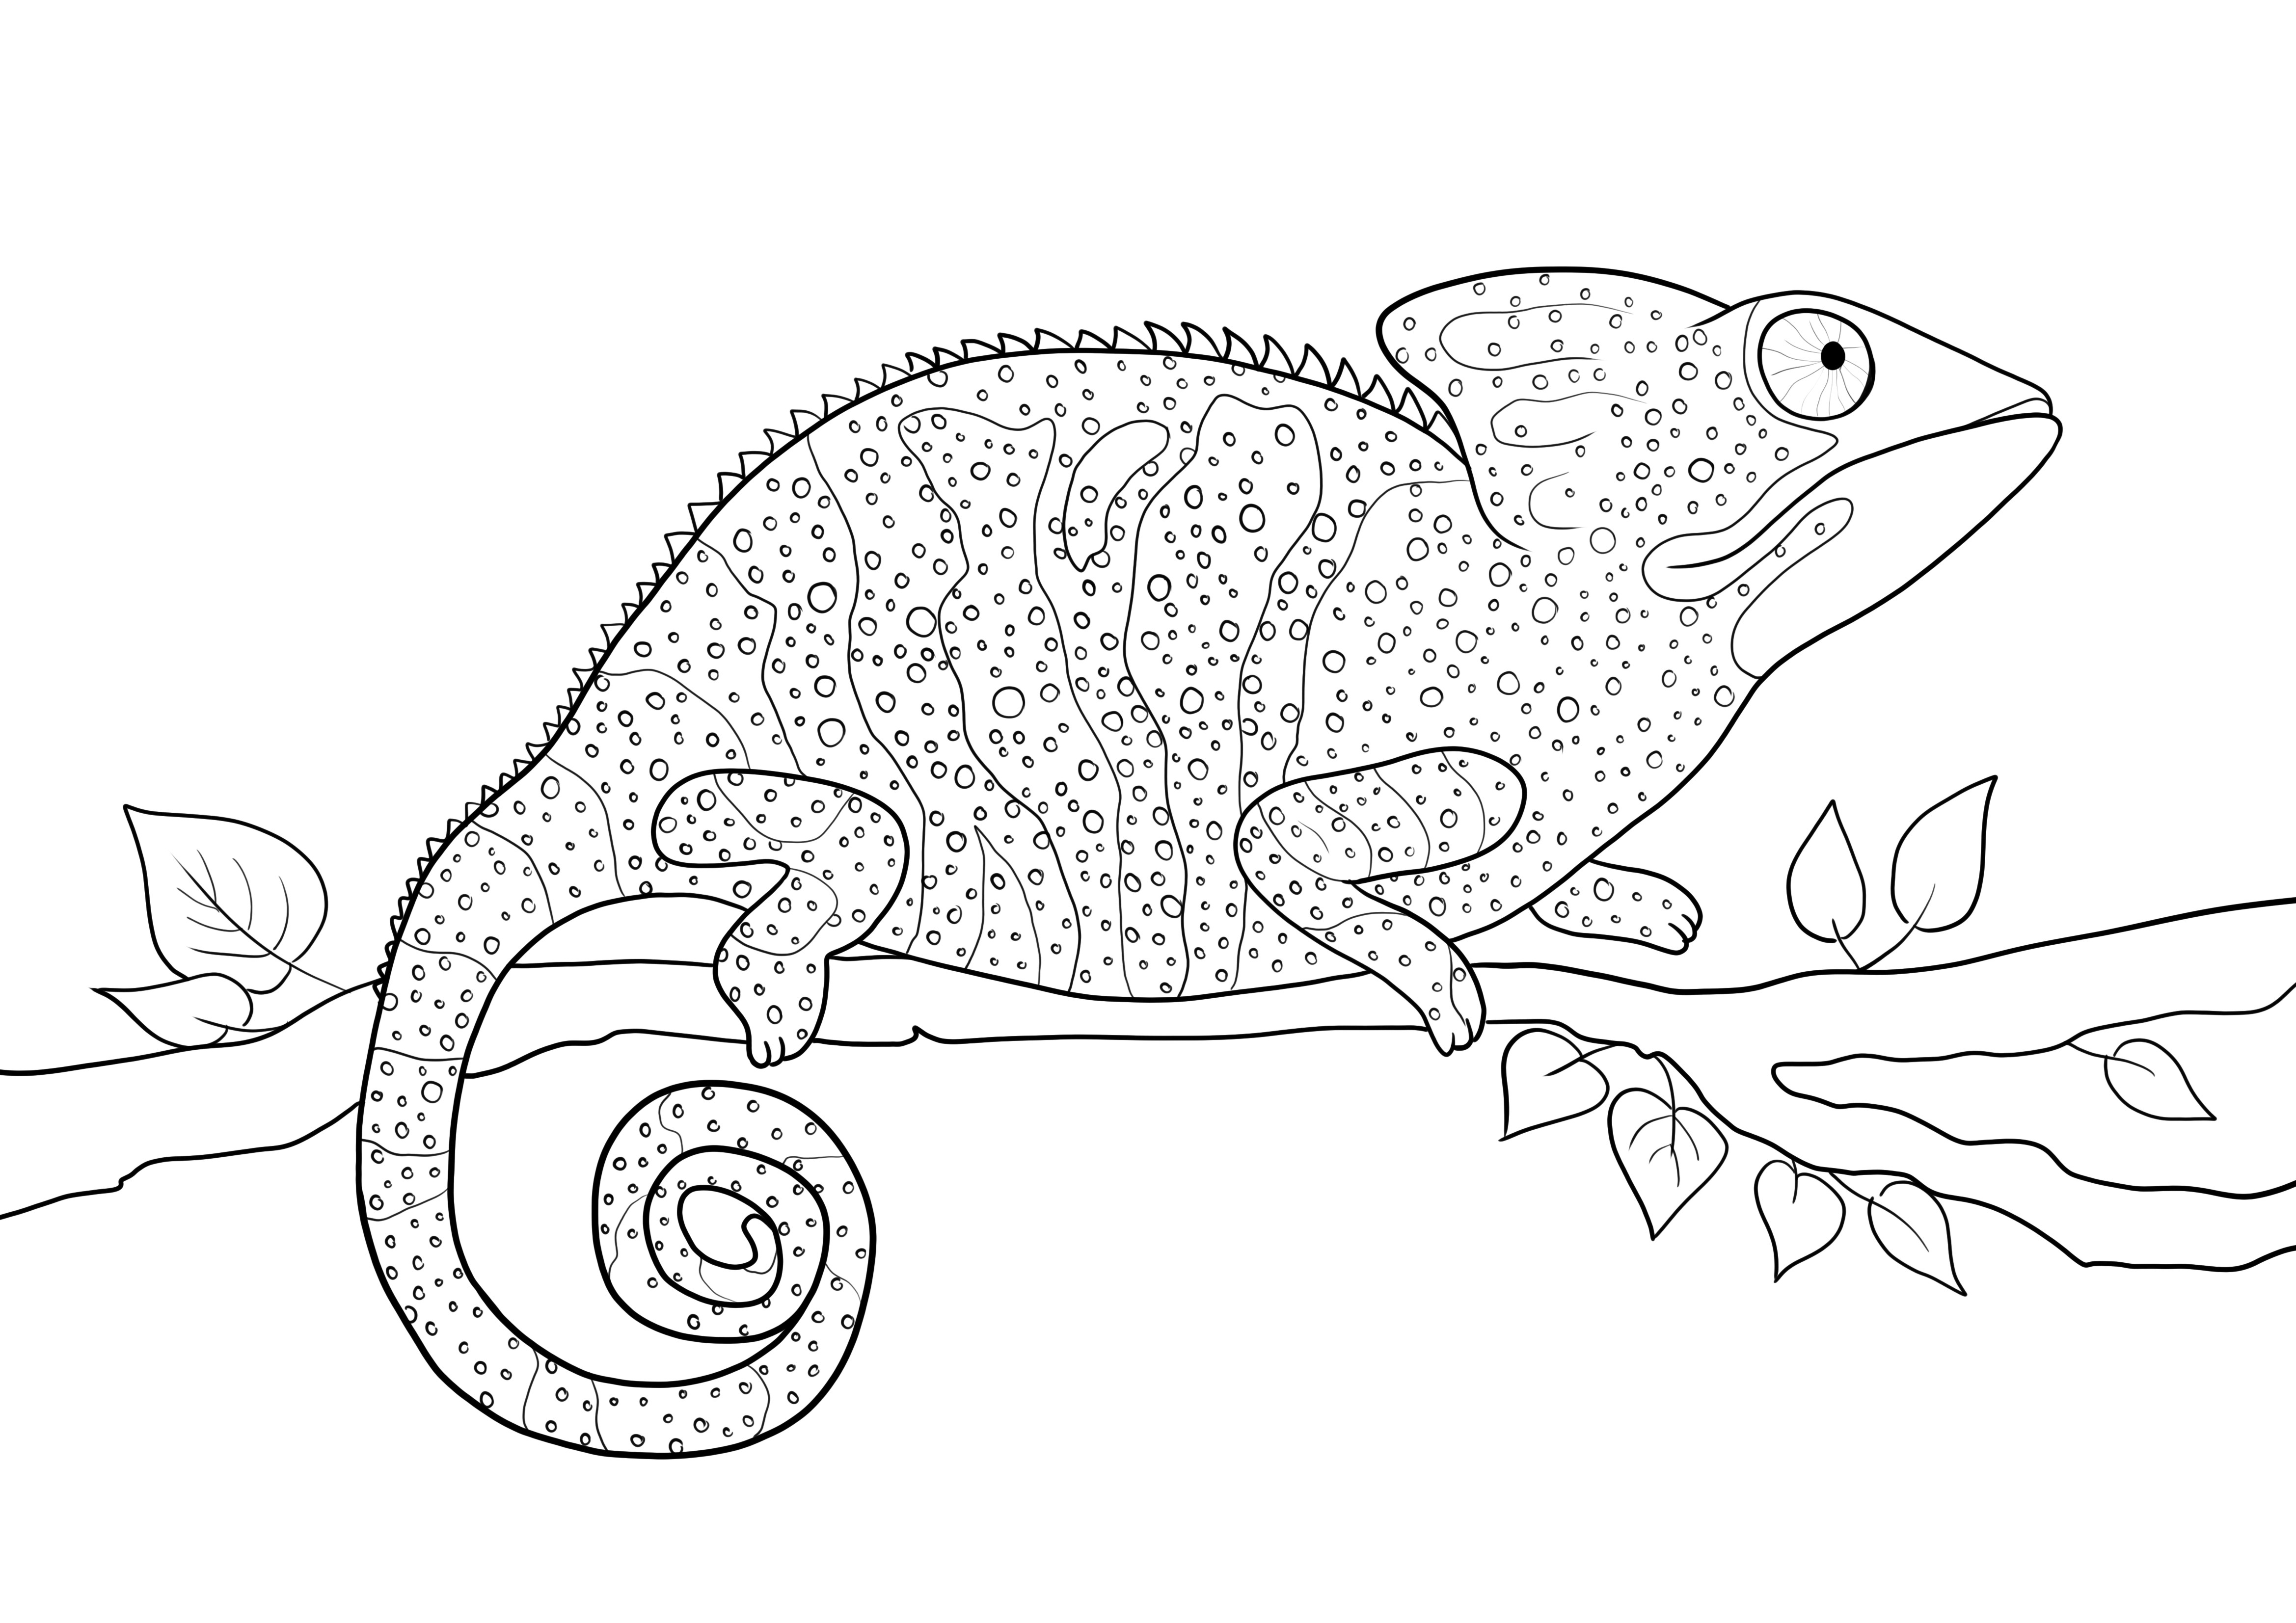 Chameleon to color and to print for free